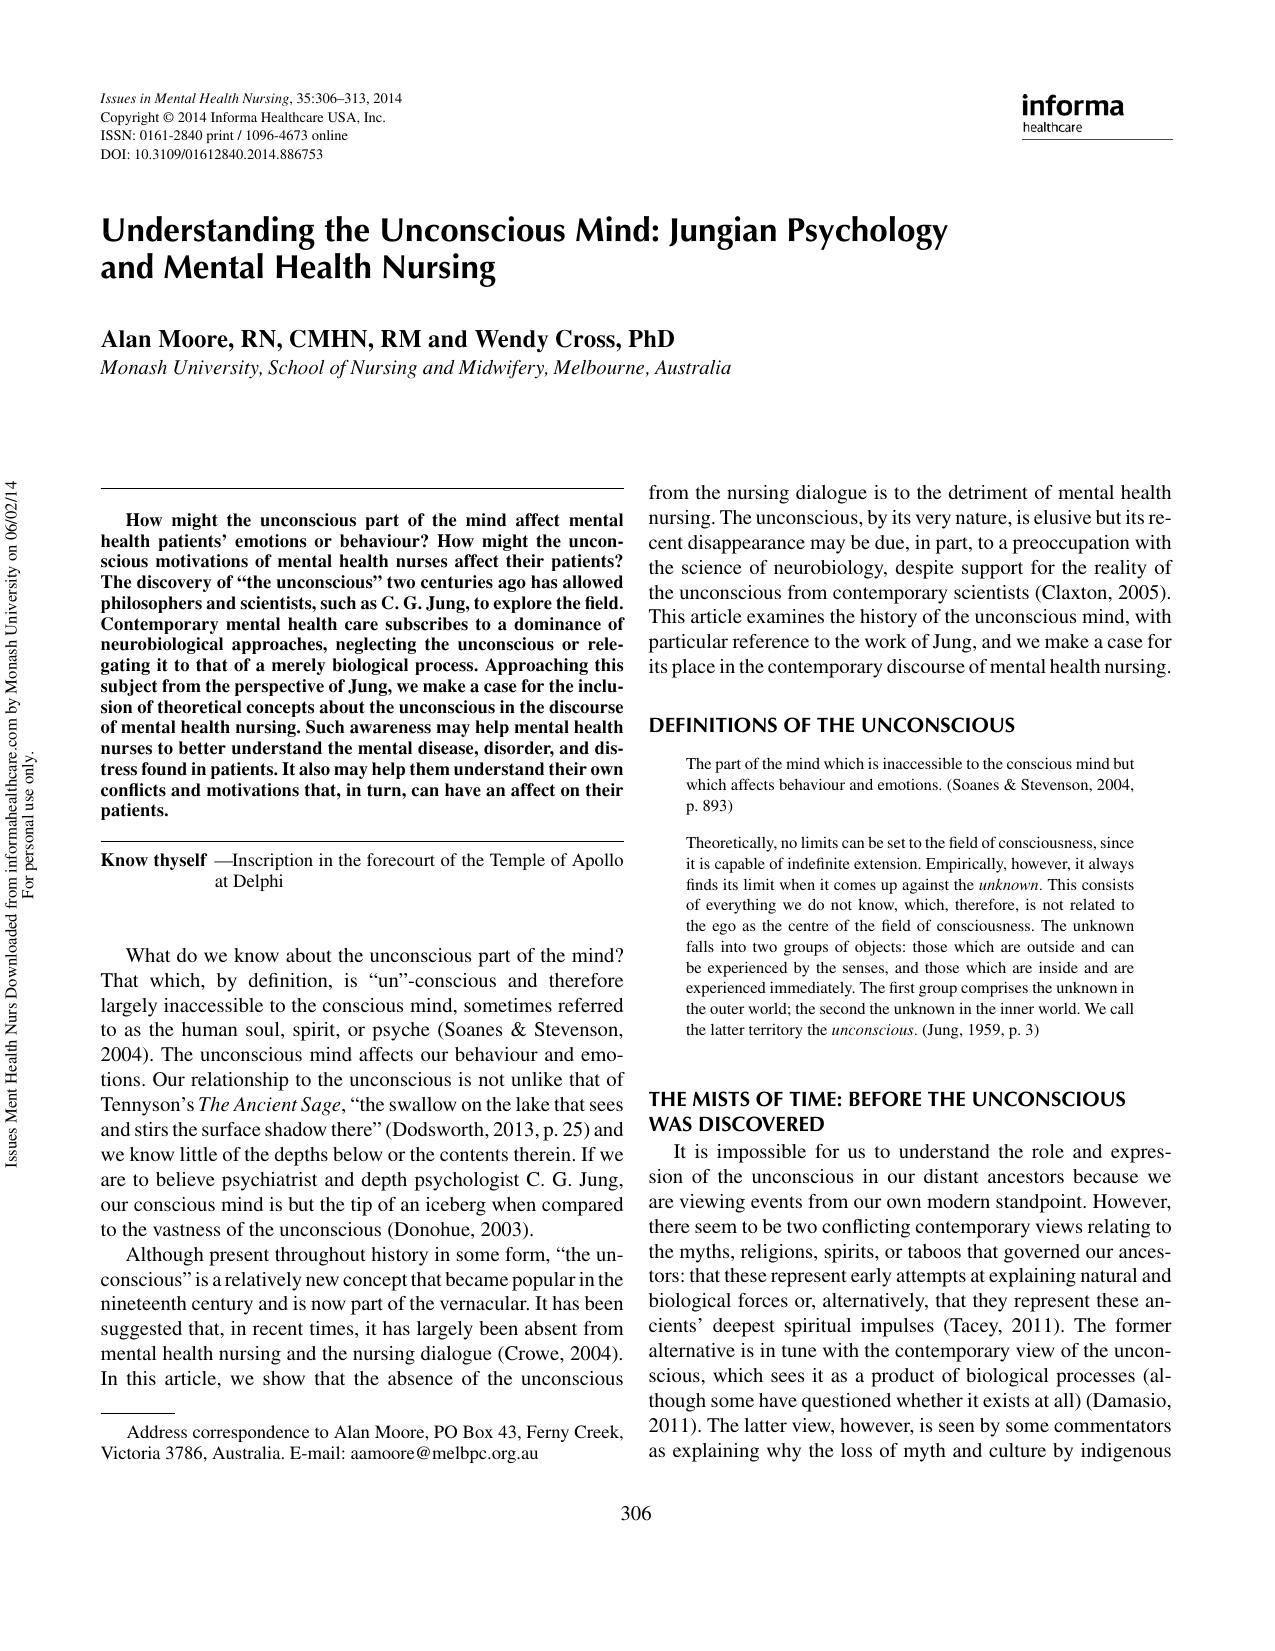 Understanding the Unconscious Mind: Jungian Psychology  and Mental Health Nursing - Article